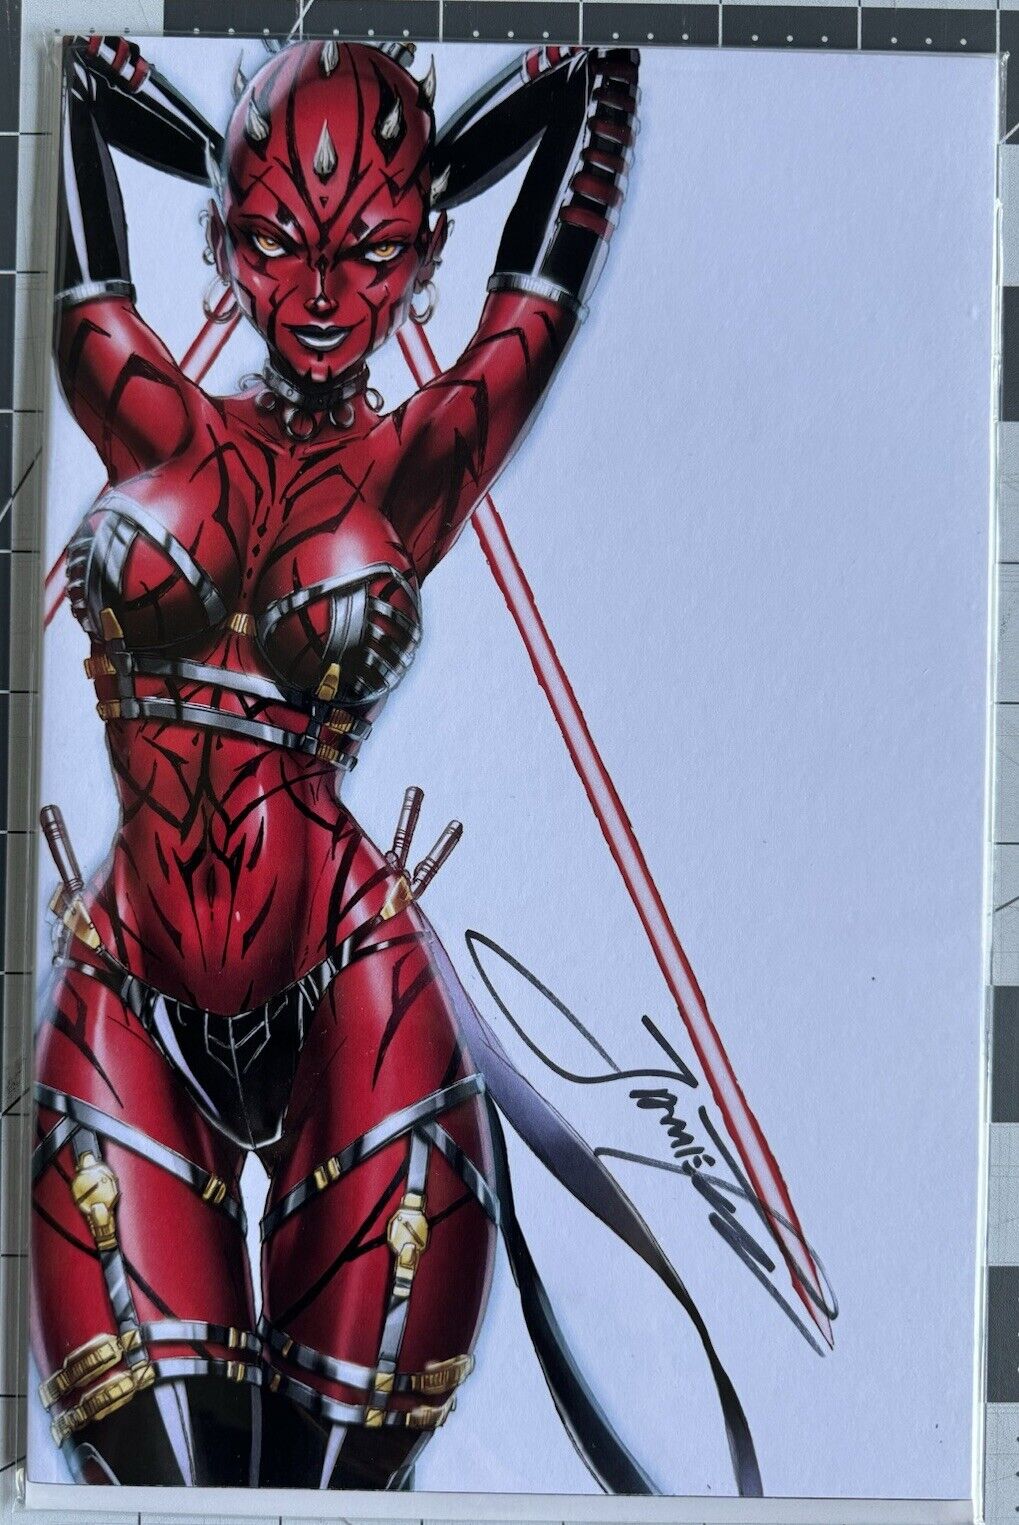 DAUGHTERS OF EDEN #1 - DARTH MAUL COSPLAY SKETCHUP